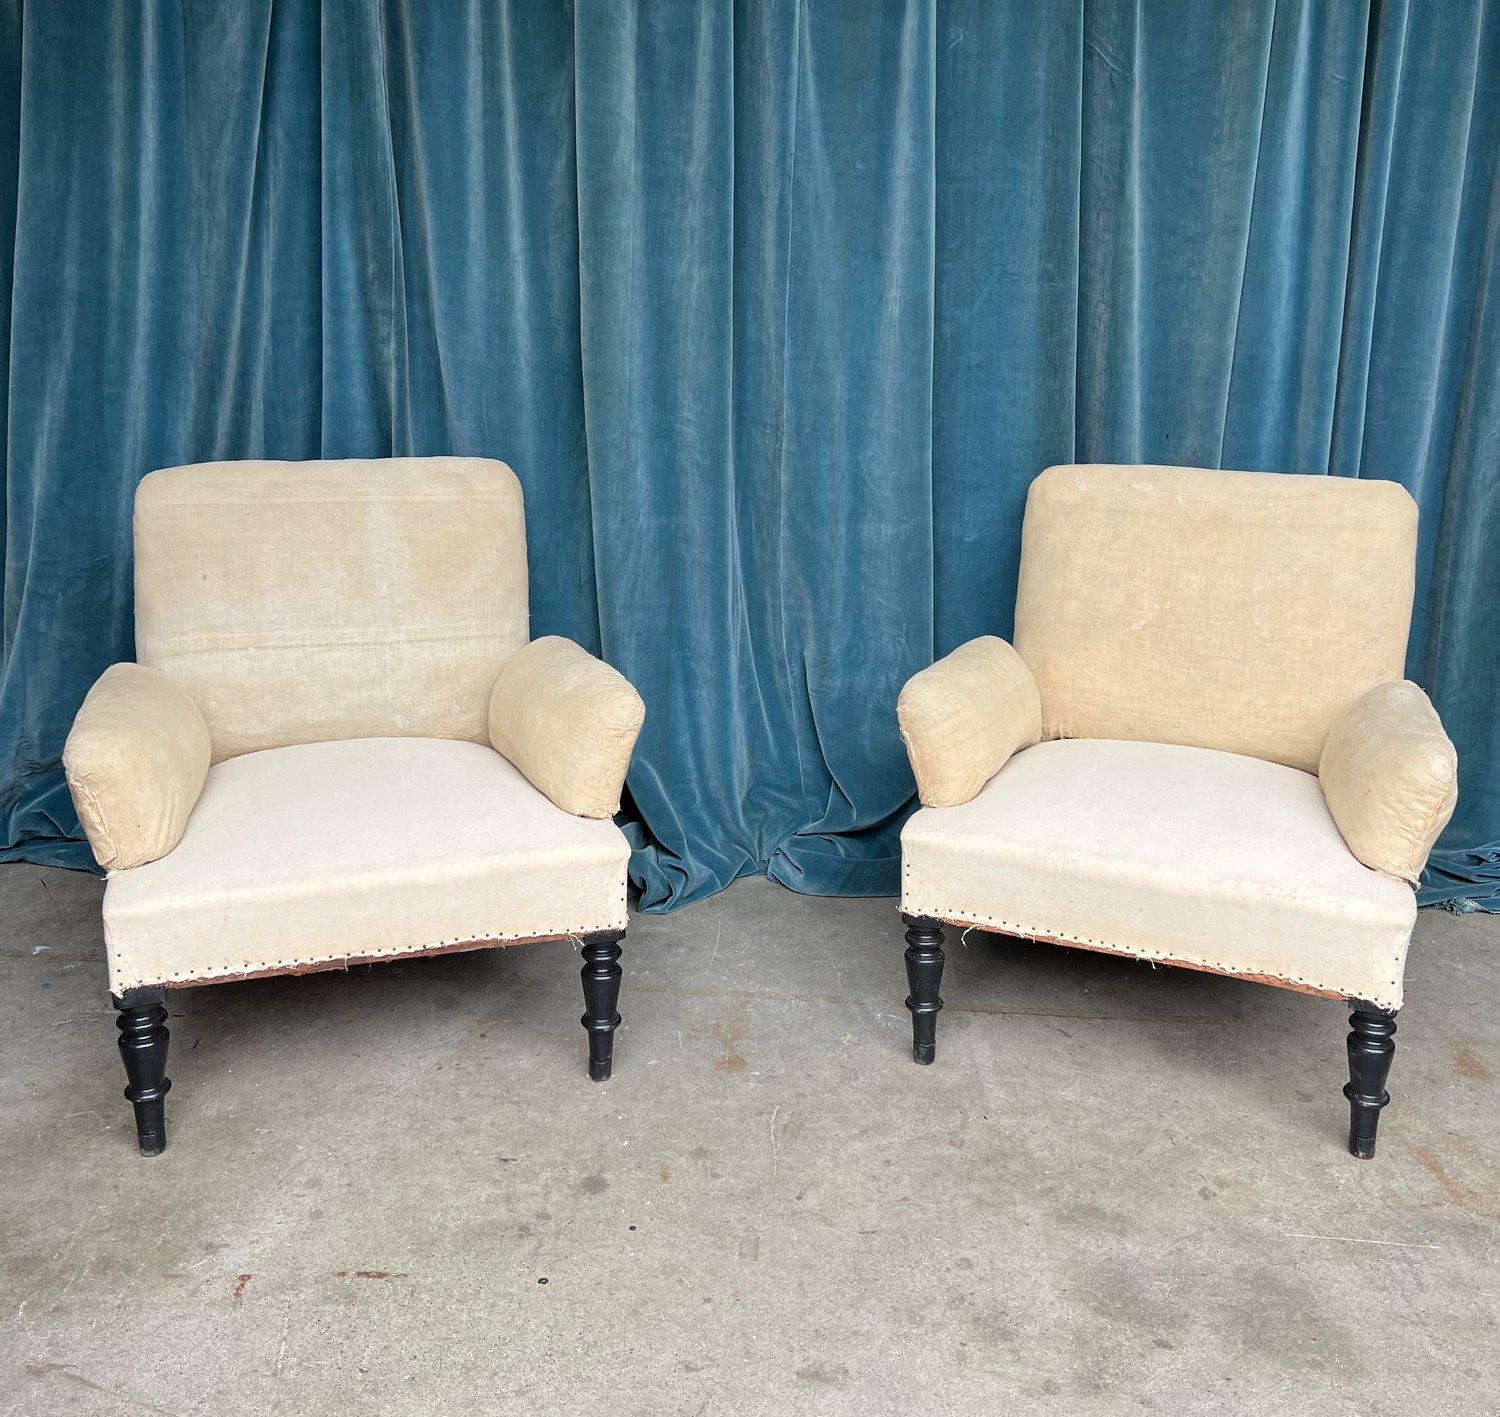 An unusual pair of French Napoleon III armchairs from the late 19th century. The chairs have semi detached arms which bring dimension and style and they are suited to a variety of settings from traditional to modern. These small scaled chairs are